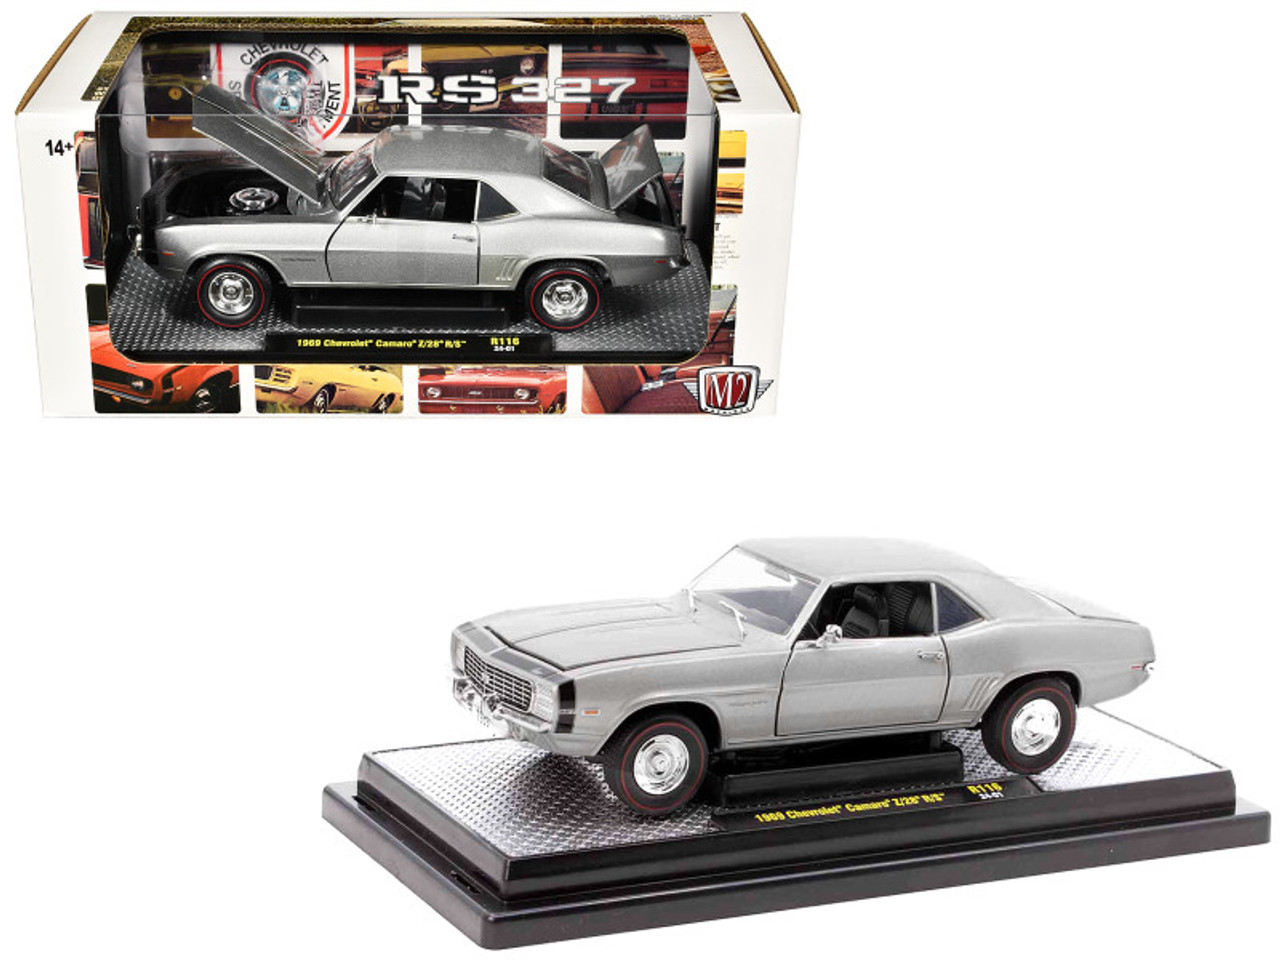 1969 Chevrolet Camaro Z/28 R/S Silver Metallic Limited Edition to 5250  pieces Worldwide 1/24 Diecast Model Car by M2 Machines - LIVECARMODEL.com